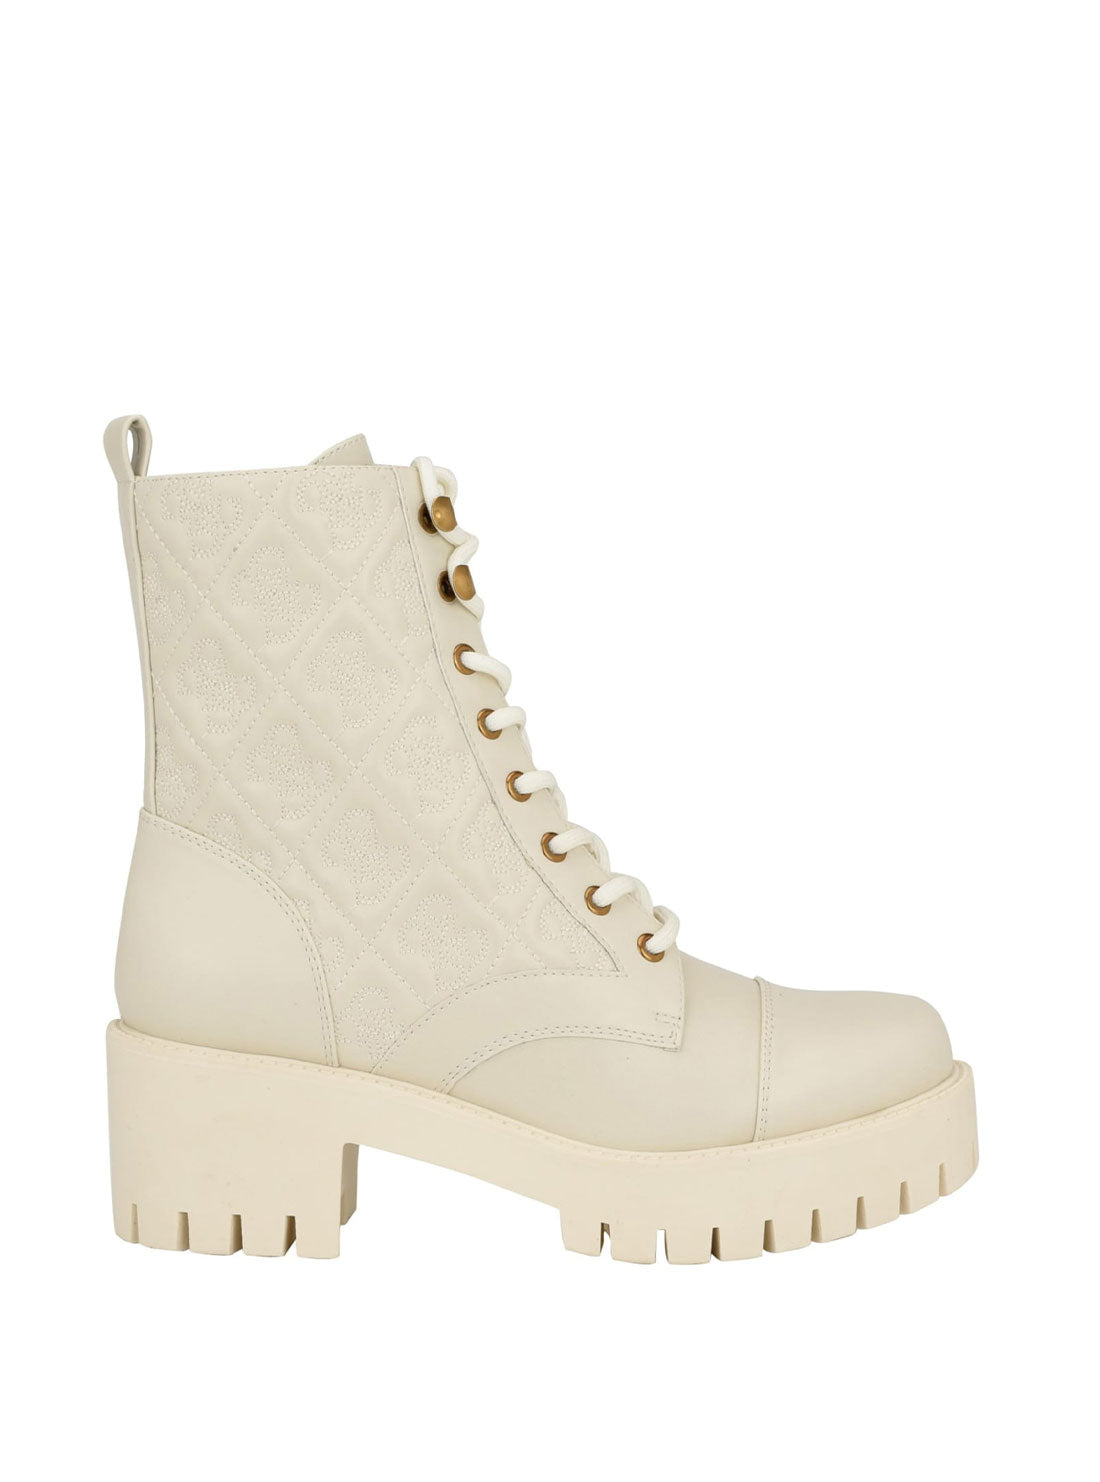 GUESS White Logo Waite Combat Boots side view